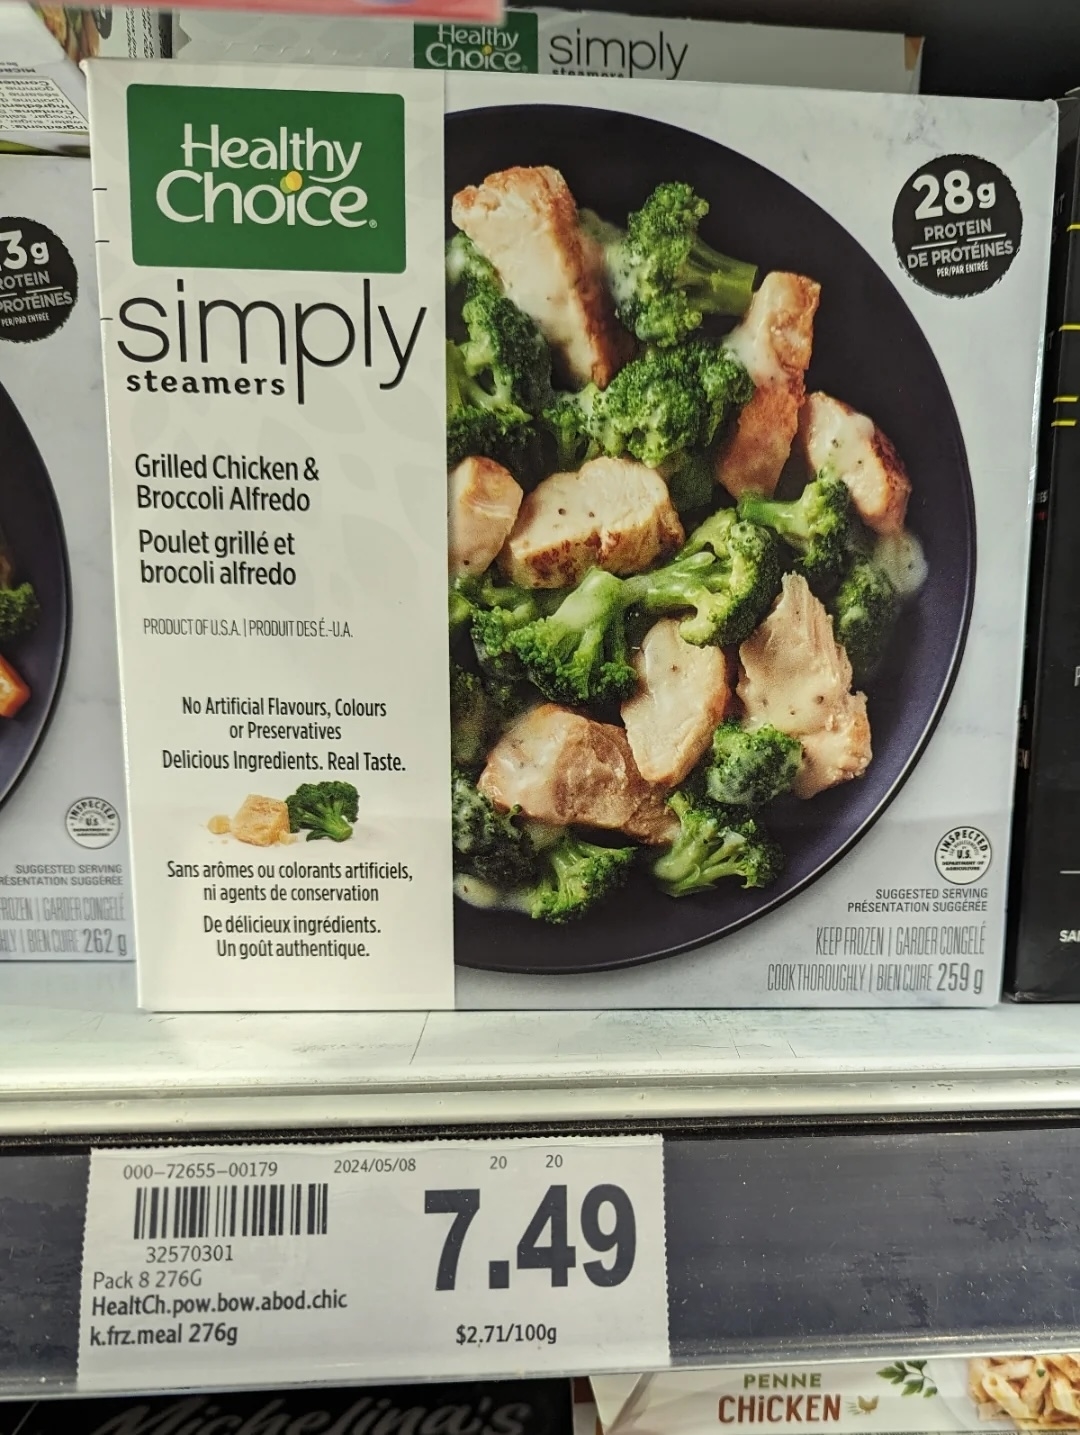 Package of Healthy Choice Simply Steamers Grilled Chicken &amp;amp; Broccoli Alfredo on store shelf, priced at $7.49